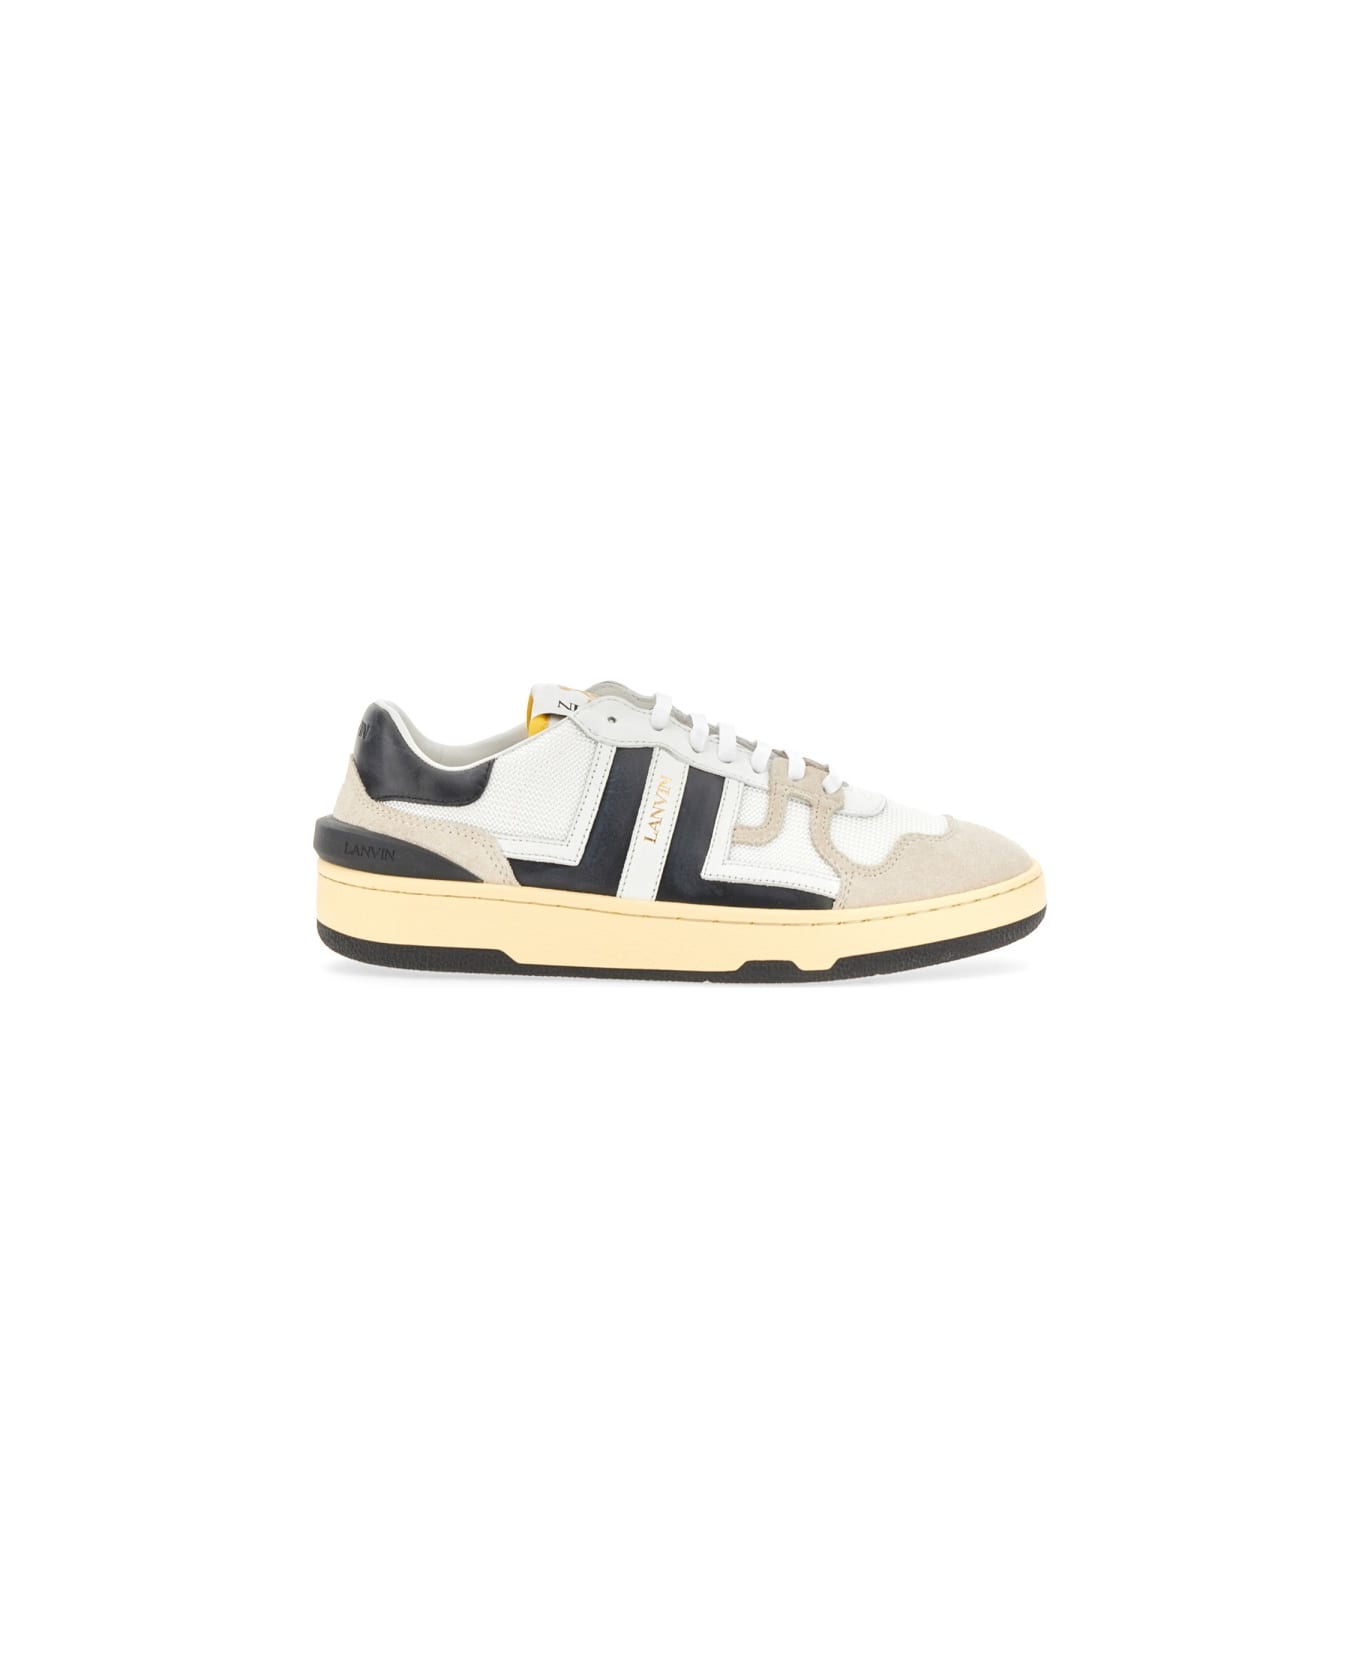 Lanvin Mesh, Suede And Nappa Leather Sneaker - WHITE スニーカー